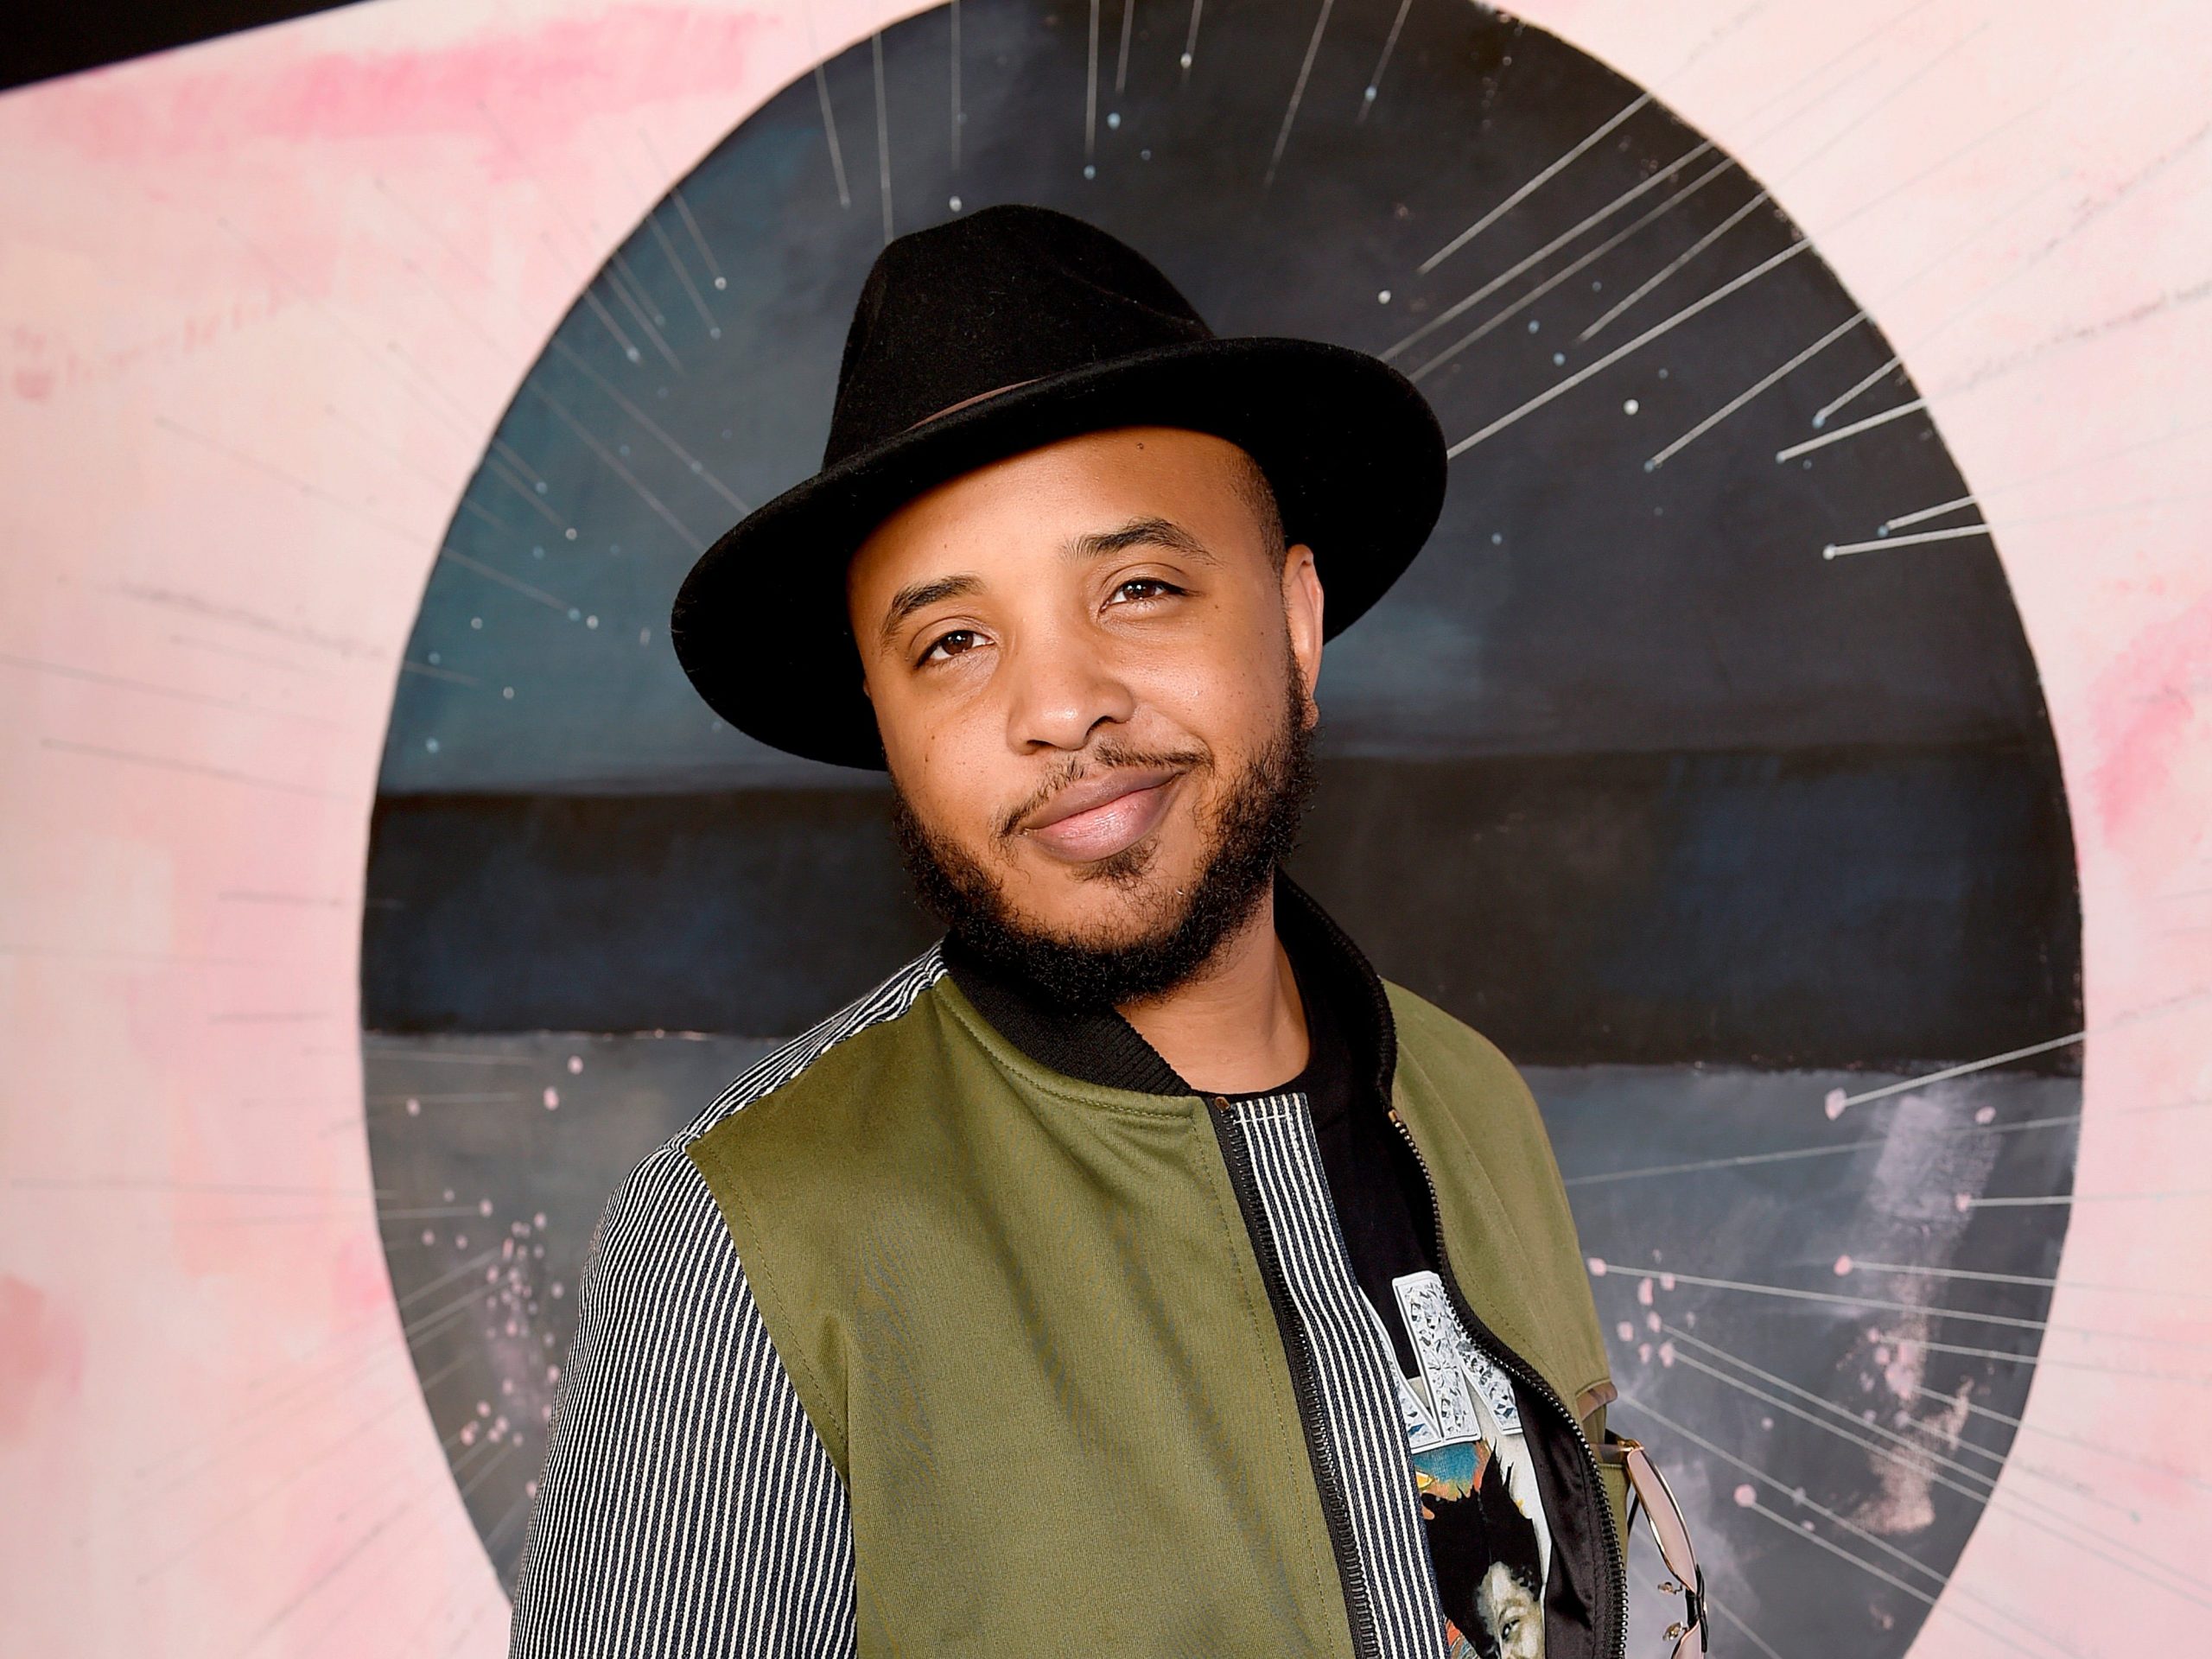 "Dear White People" writer, creator and director Justin Simien